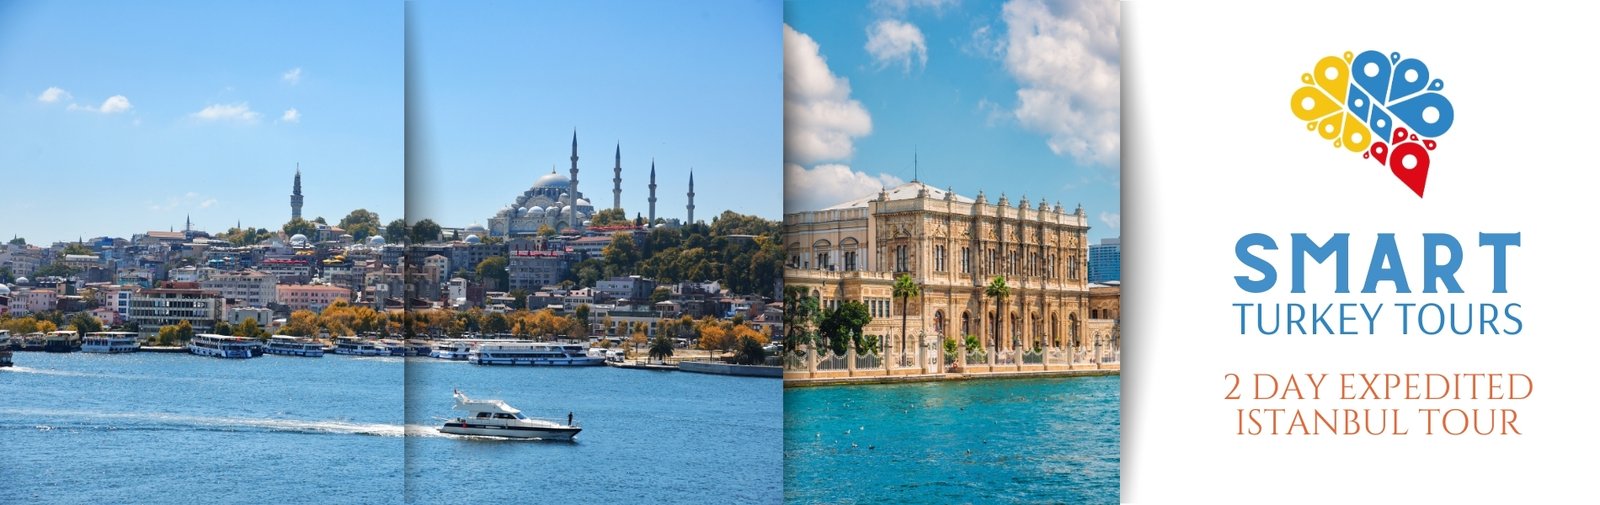 JEWELS OF ISTANBUL TOUR